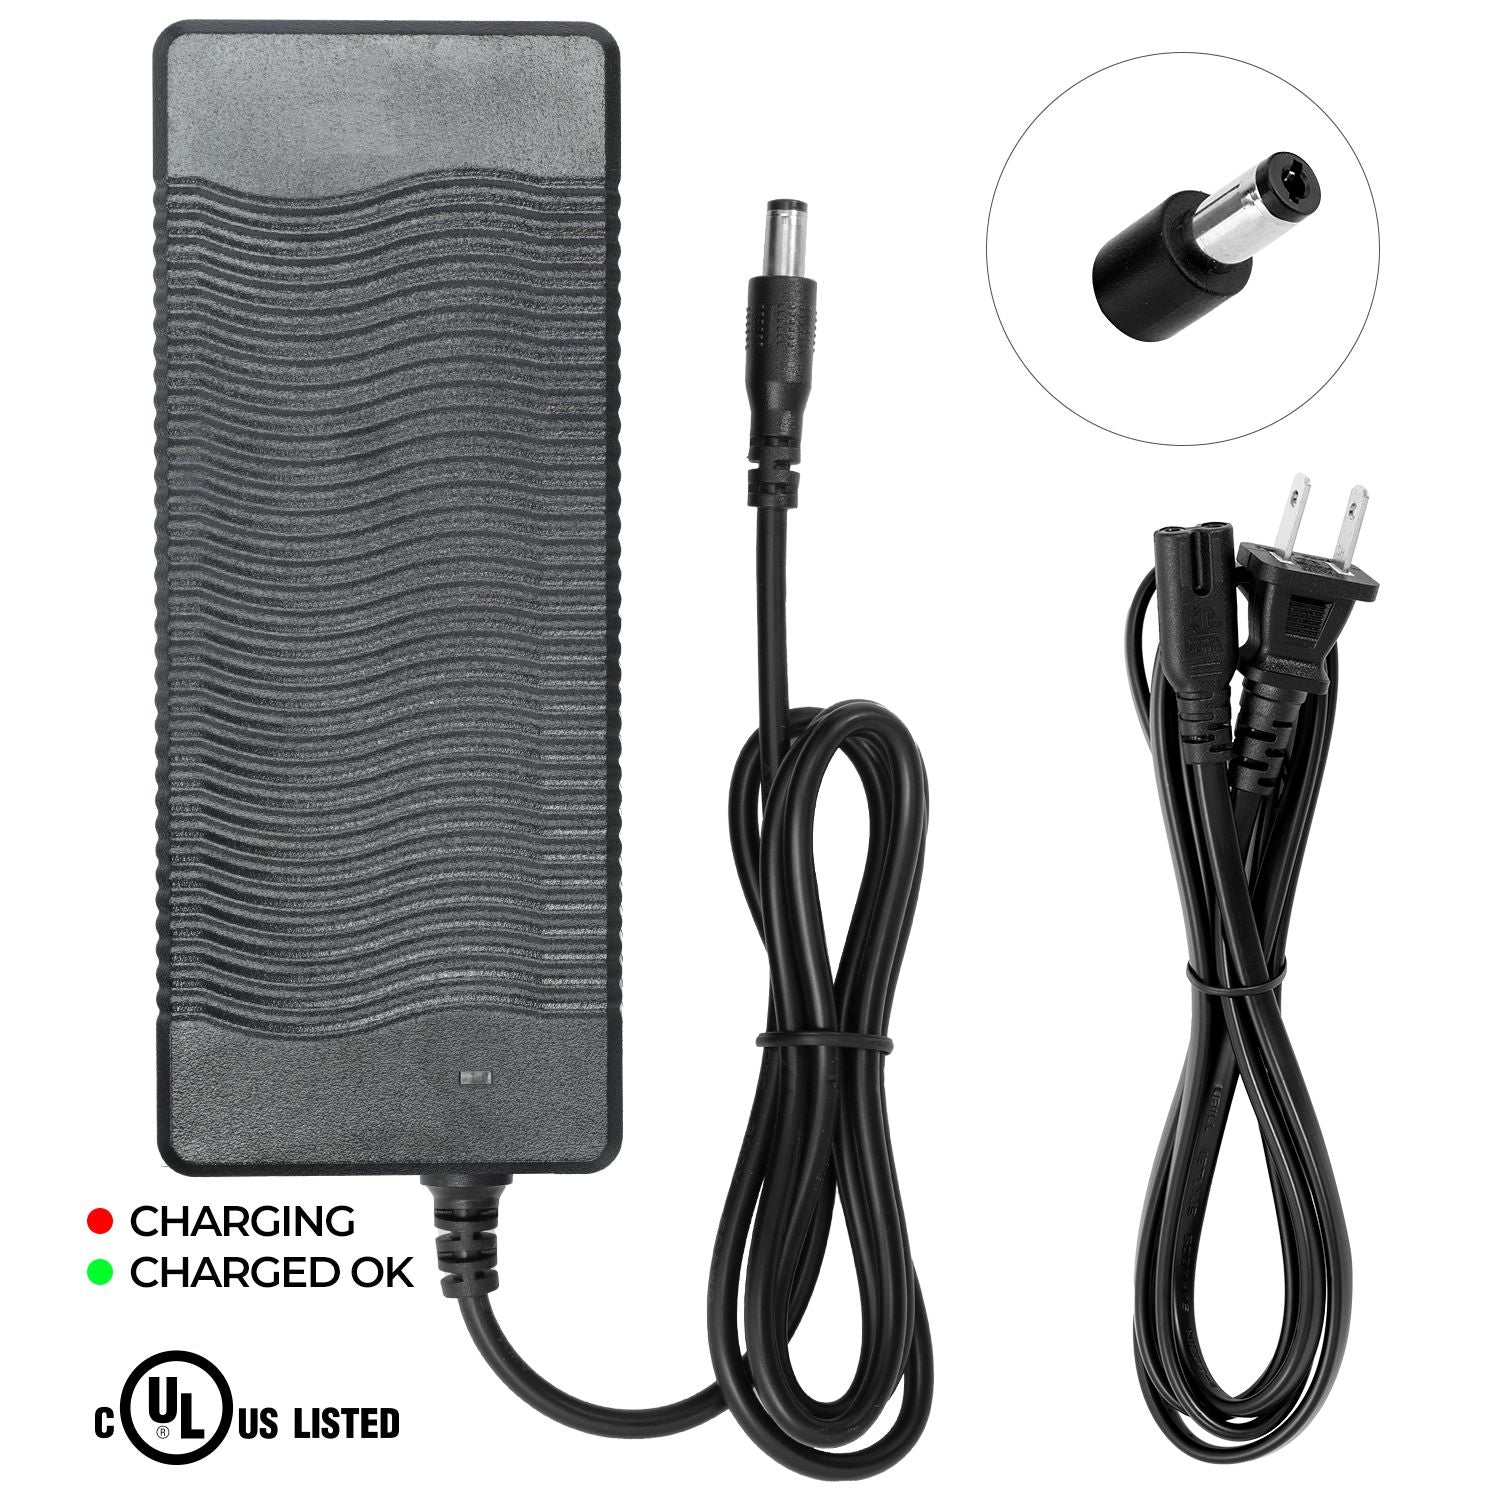 UL Listed Charger for AVENTON PACE 500 Electric Bike (If your AVENTON model is something else, do NOT order it)